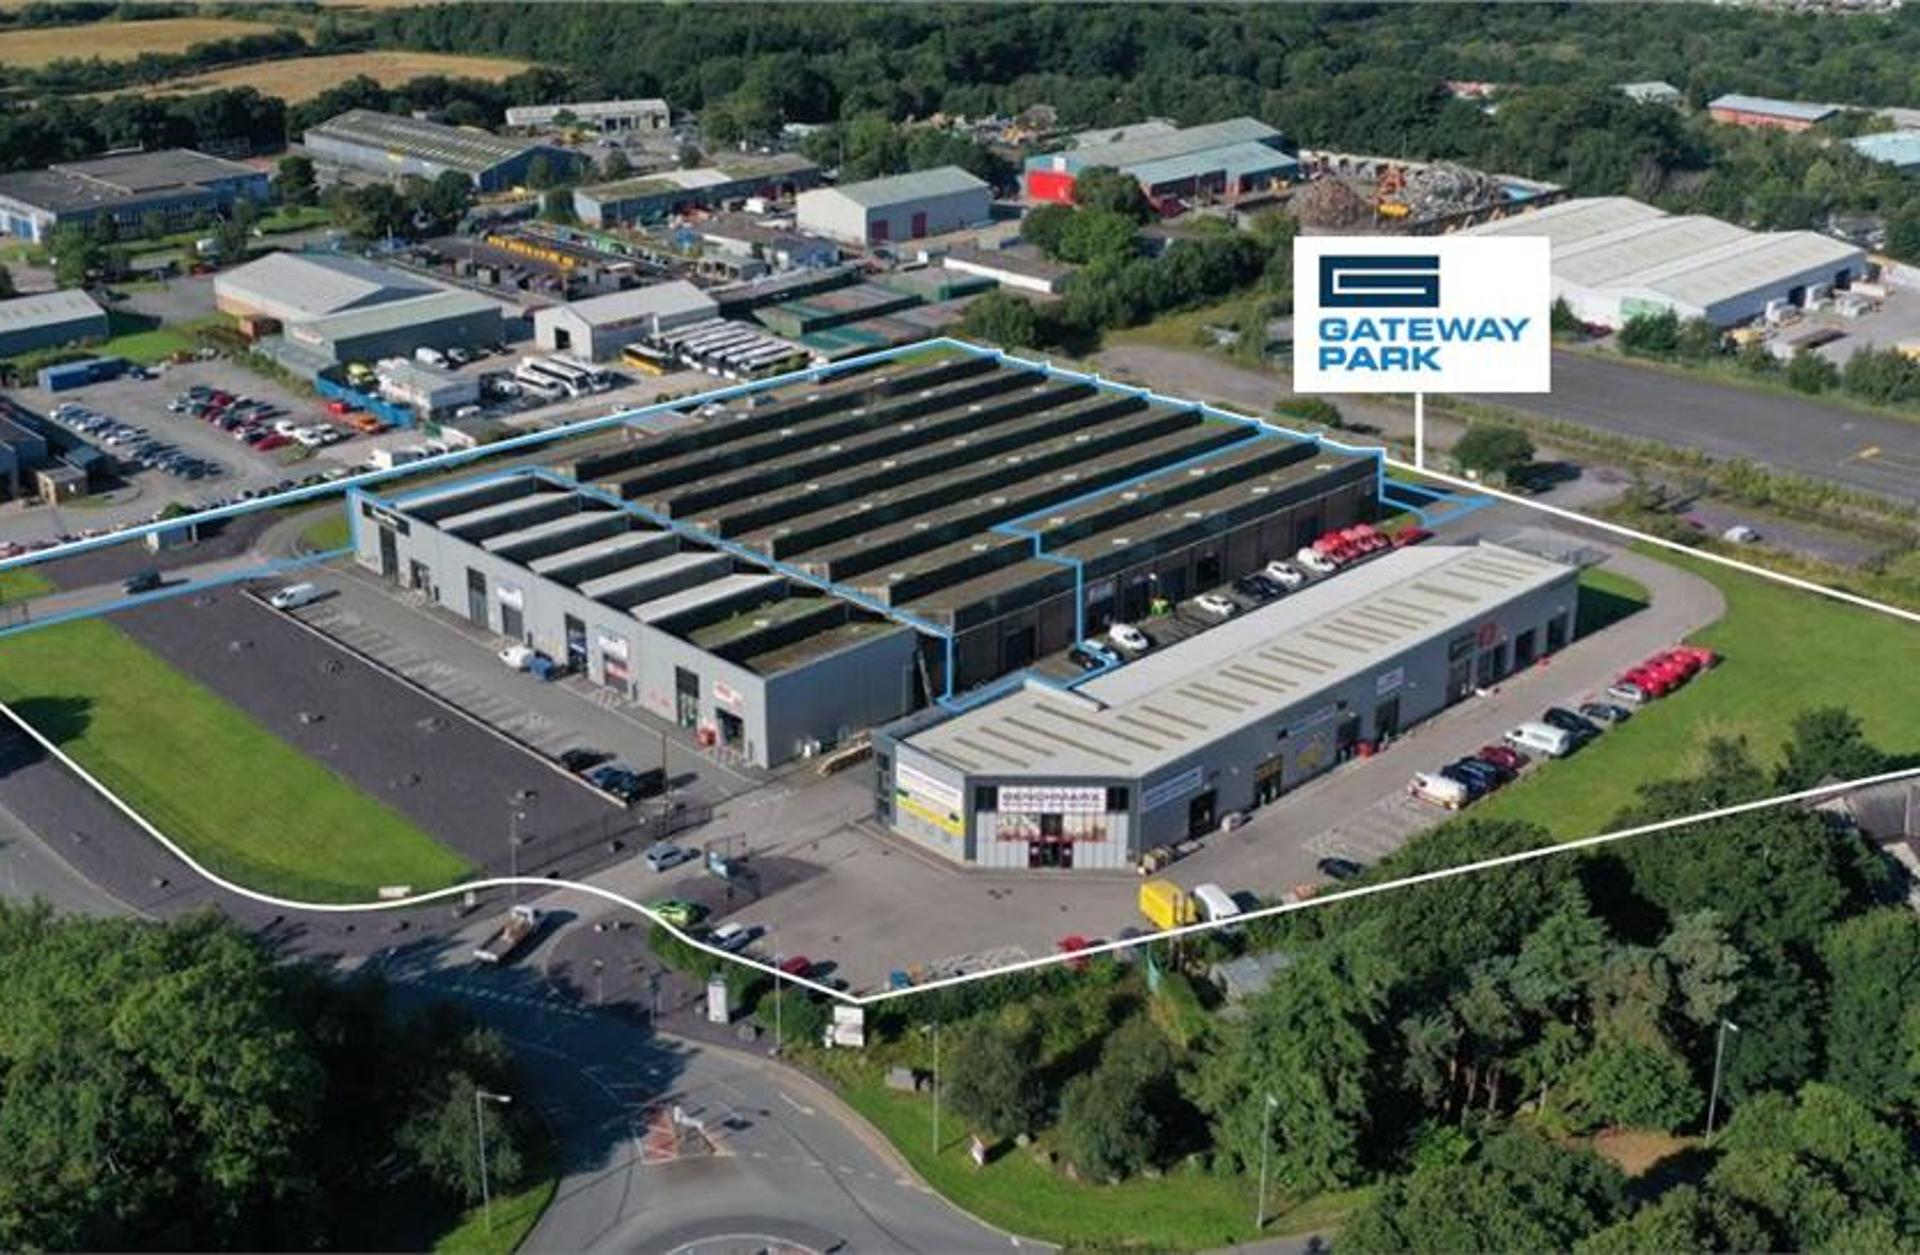 52.7k sq ft warehouse in Bangor up for sale in £2.86m auction